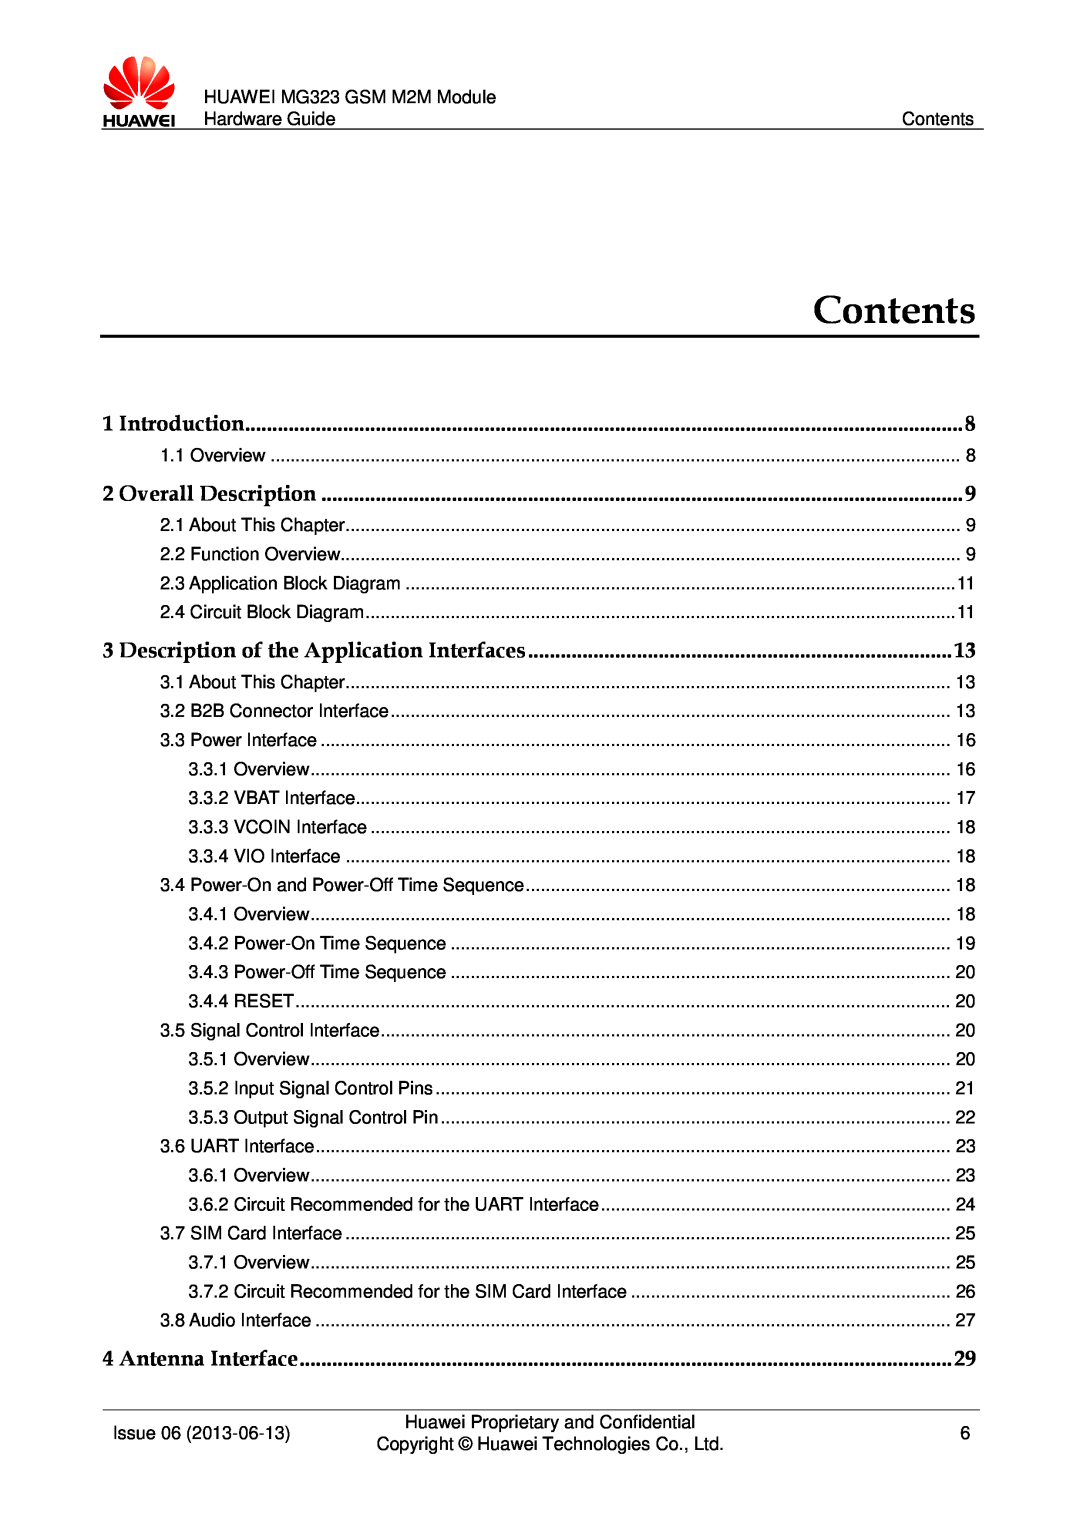 Huawei MG323 manual Contents, Description of the Application Interfaces 